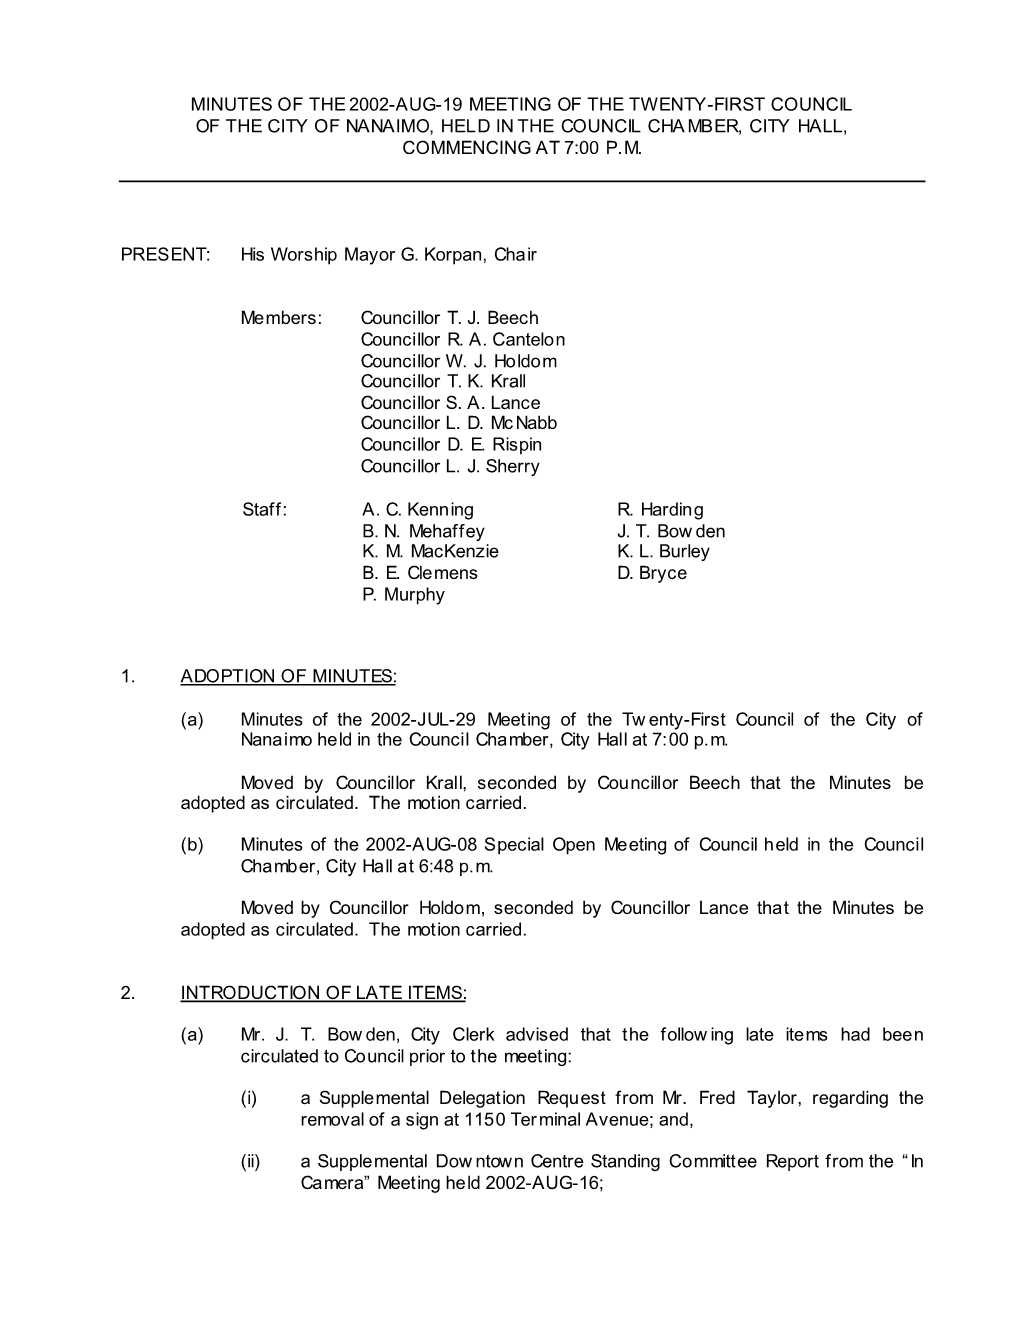 Council Minutes for Aug 19, 2002